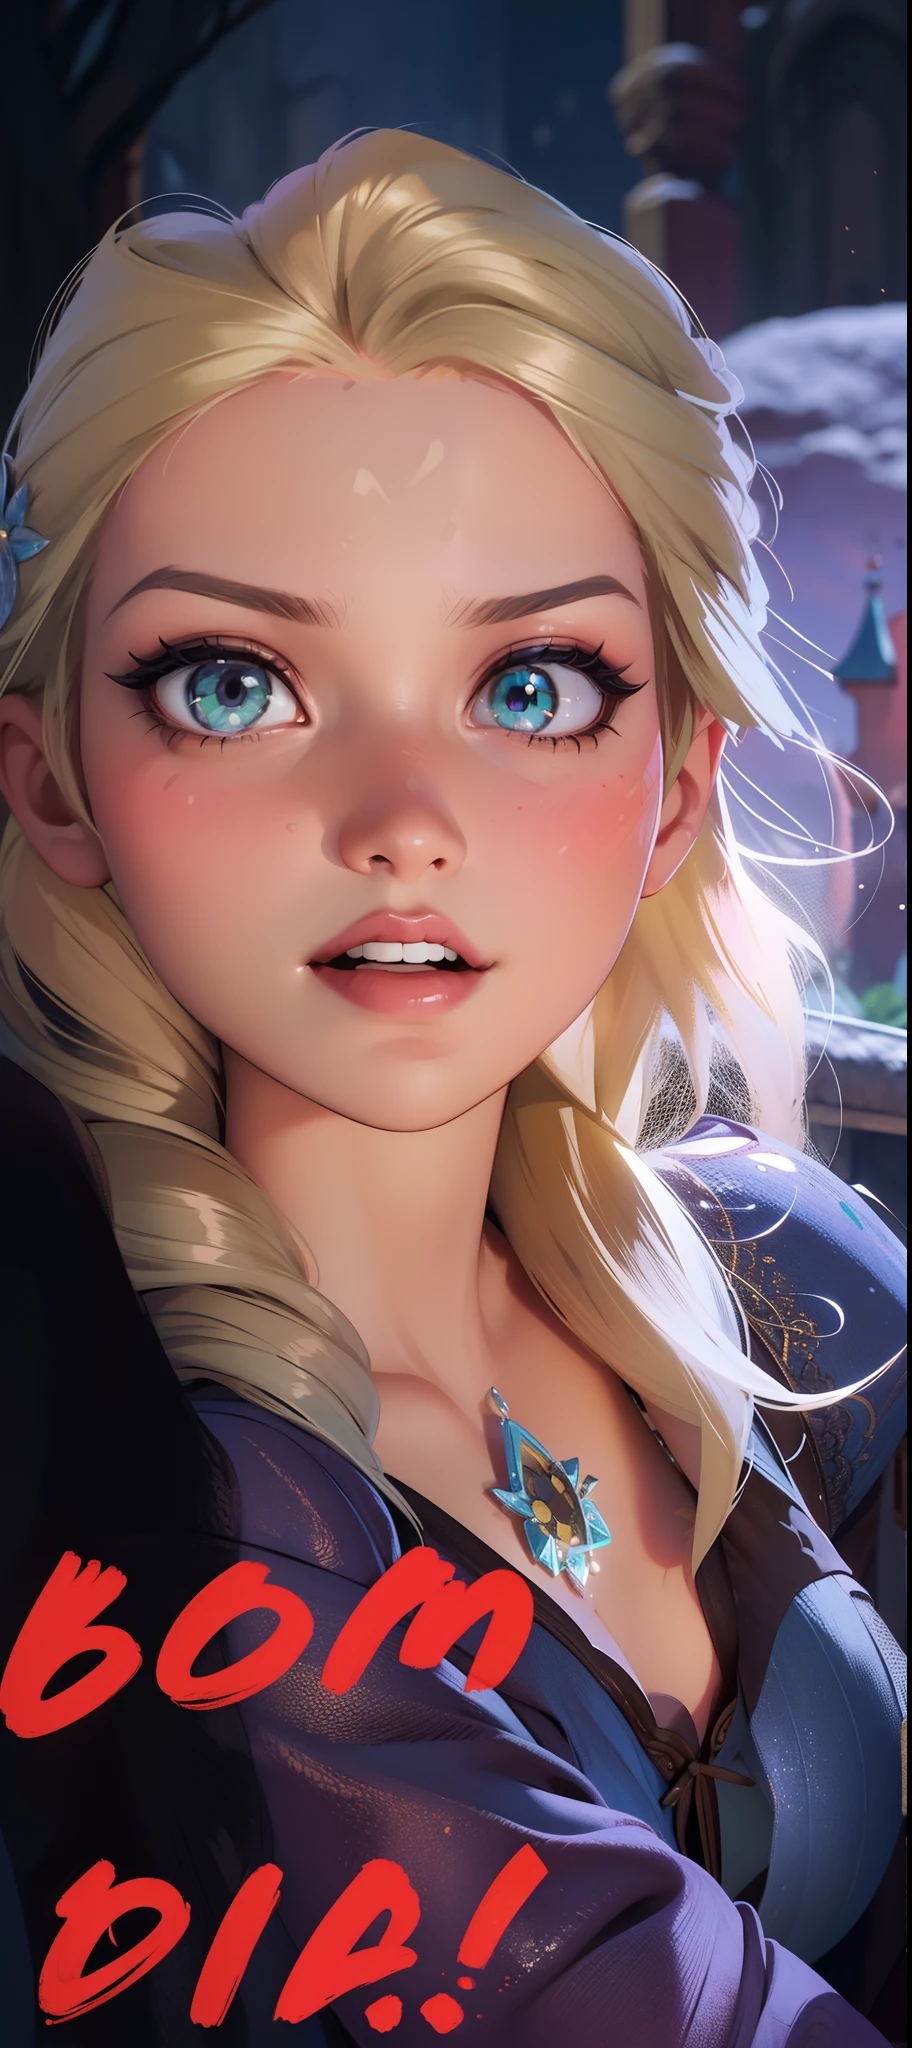 Elsa-Rapunzel Fusion, Merging models, Rapunzel&#39;s clothes, melting, 1girl, Beautiful, Character, Woman, Female, (master part:1.2), (best qualityer:1.2), (独奏:1.2), ((struggling pose)), ((field of battle)), cinemactic, perfects eyes, perfect  skin, perfect lighting, sorrido, Lumiere, Farbe, texturized skin, detail, Beauthfull, wonder wonder wonder wonder wonder wonder wonder wonder wonder wonder wonder wonder wonder wonder wonder wonder wonder wonder wonder wonder wonder wonder wonder wonder wonder wonder wonder wonder wonder wonder wonder wonder, ultra detali, face perfect